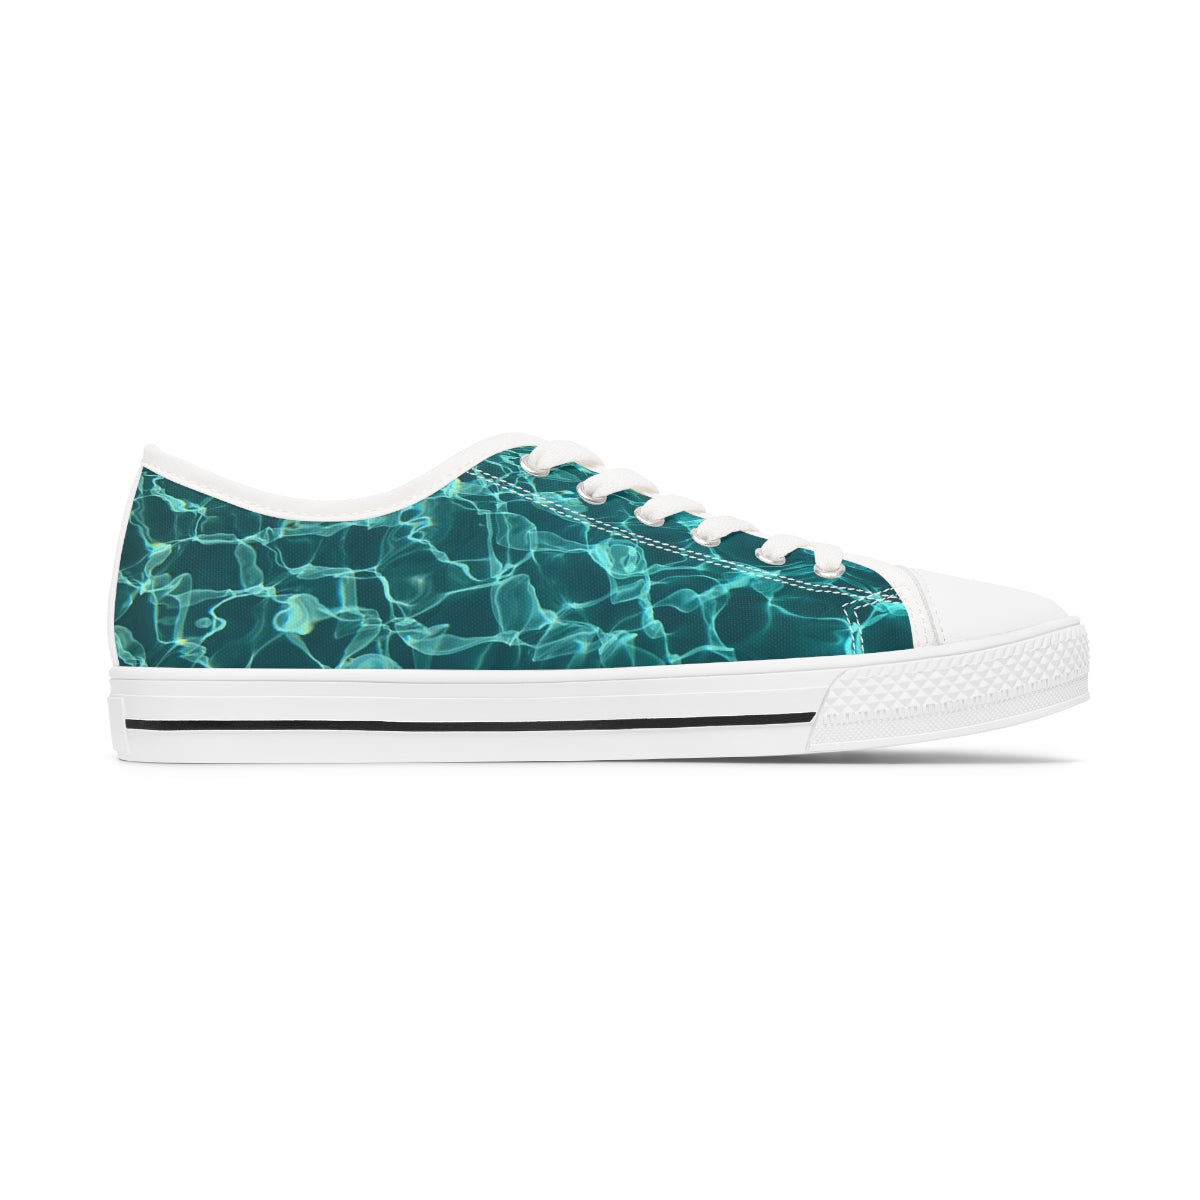 Women's Low Top Sneakers Turquoise color design